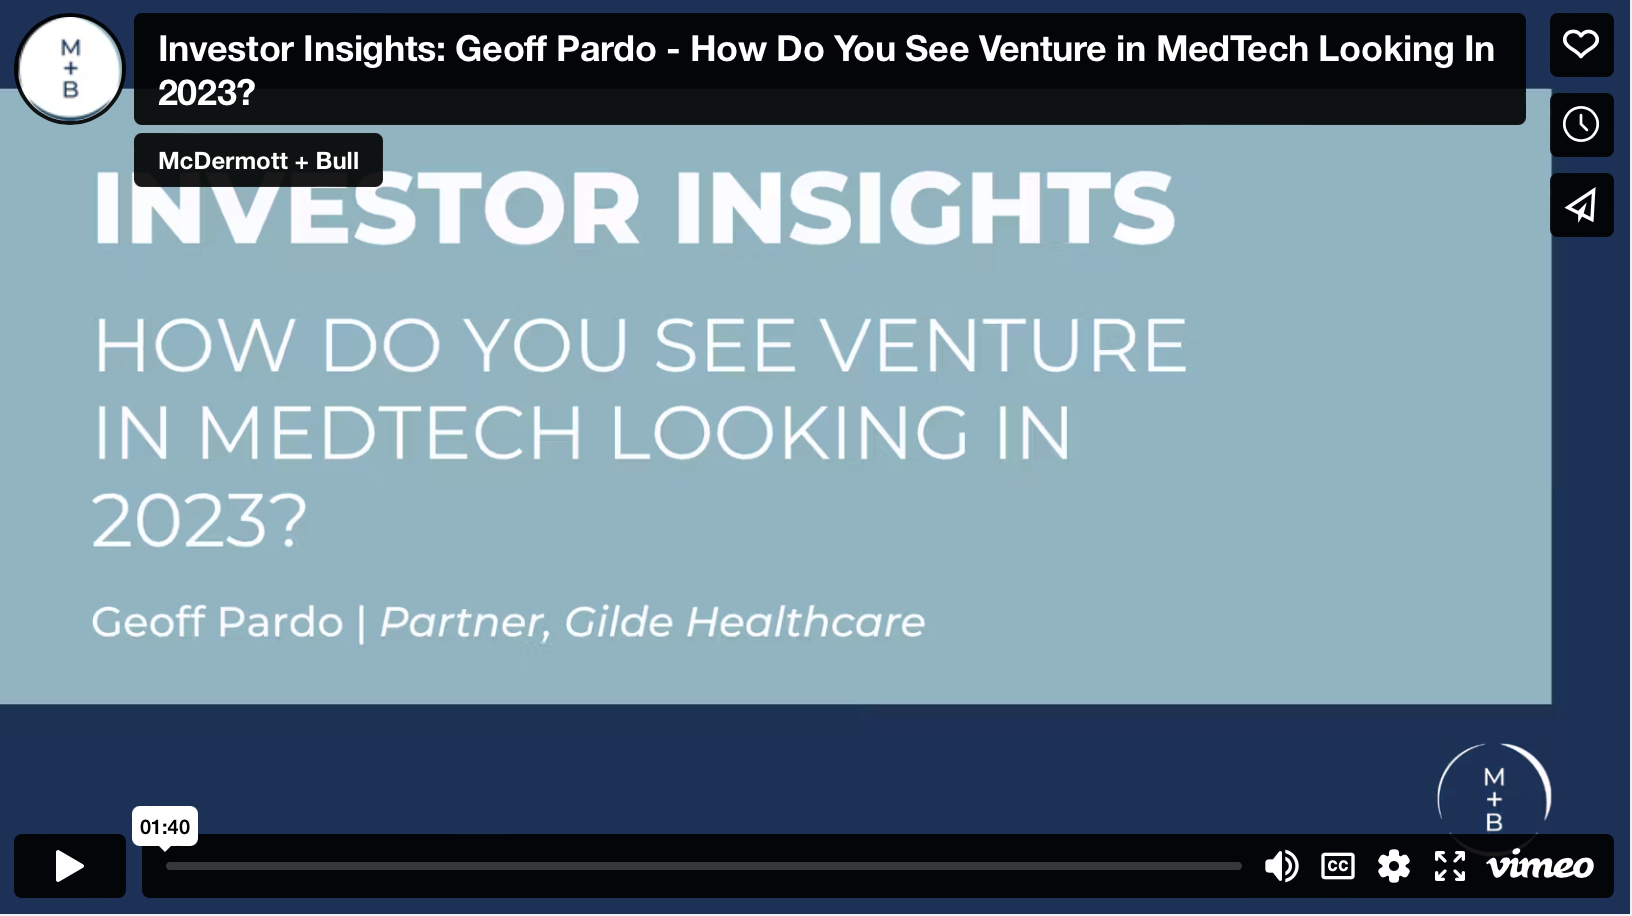 Investor Insights Geoff Pardo How Do You See Venture in MedTech Looking In 2023